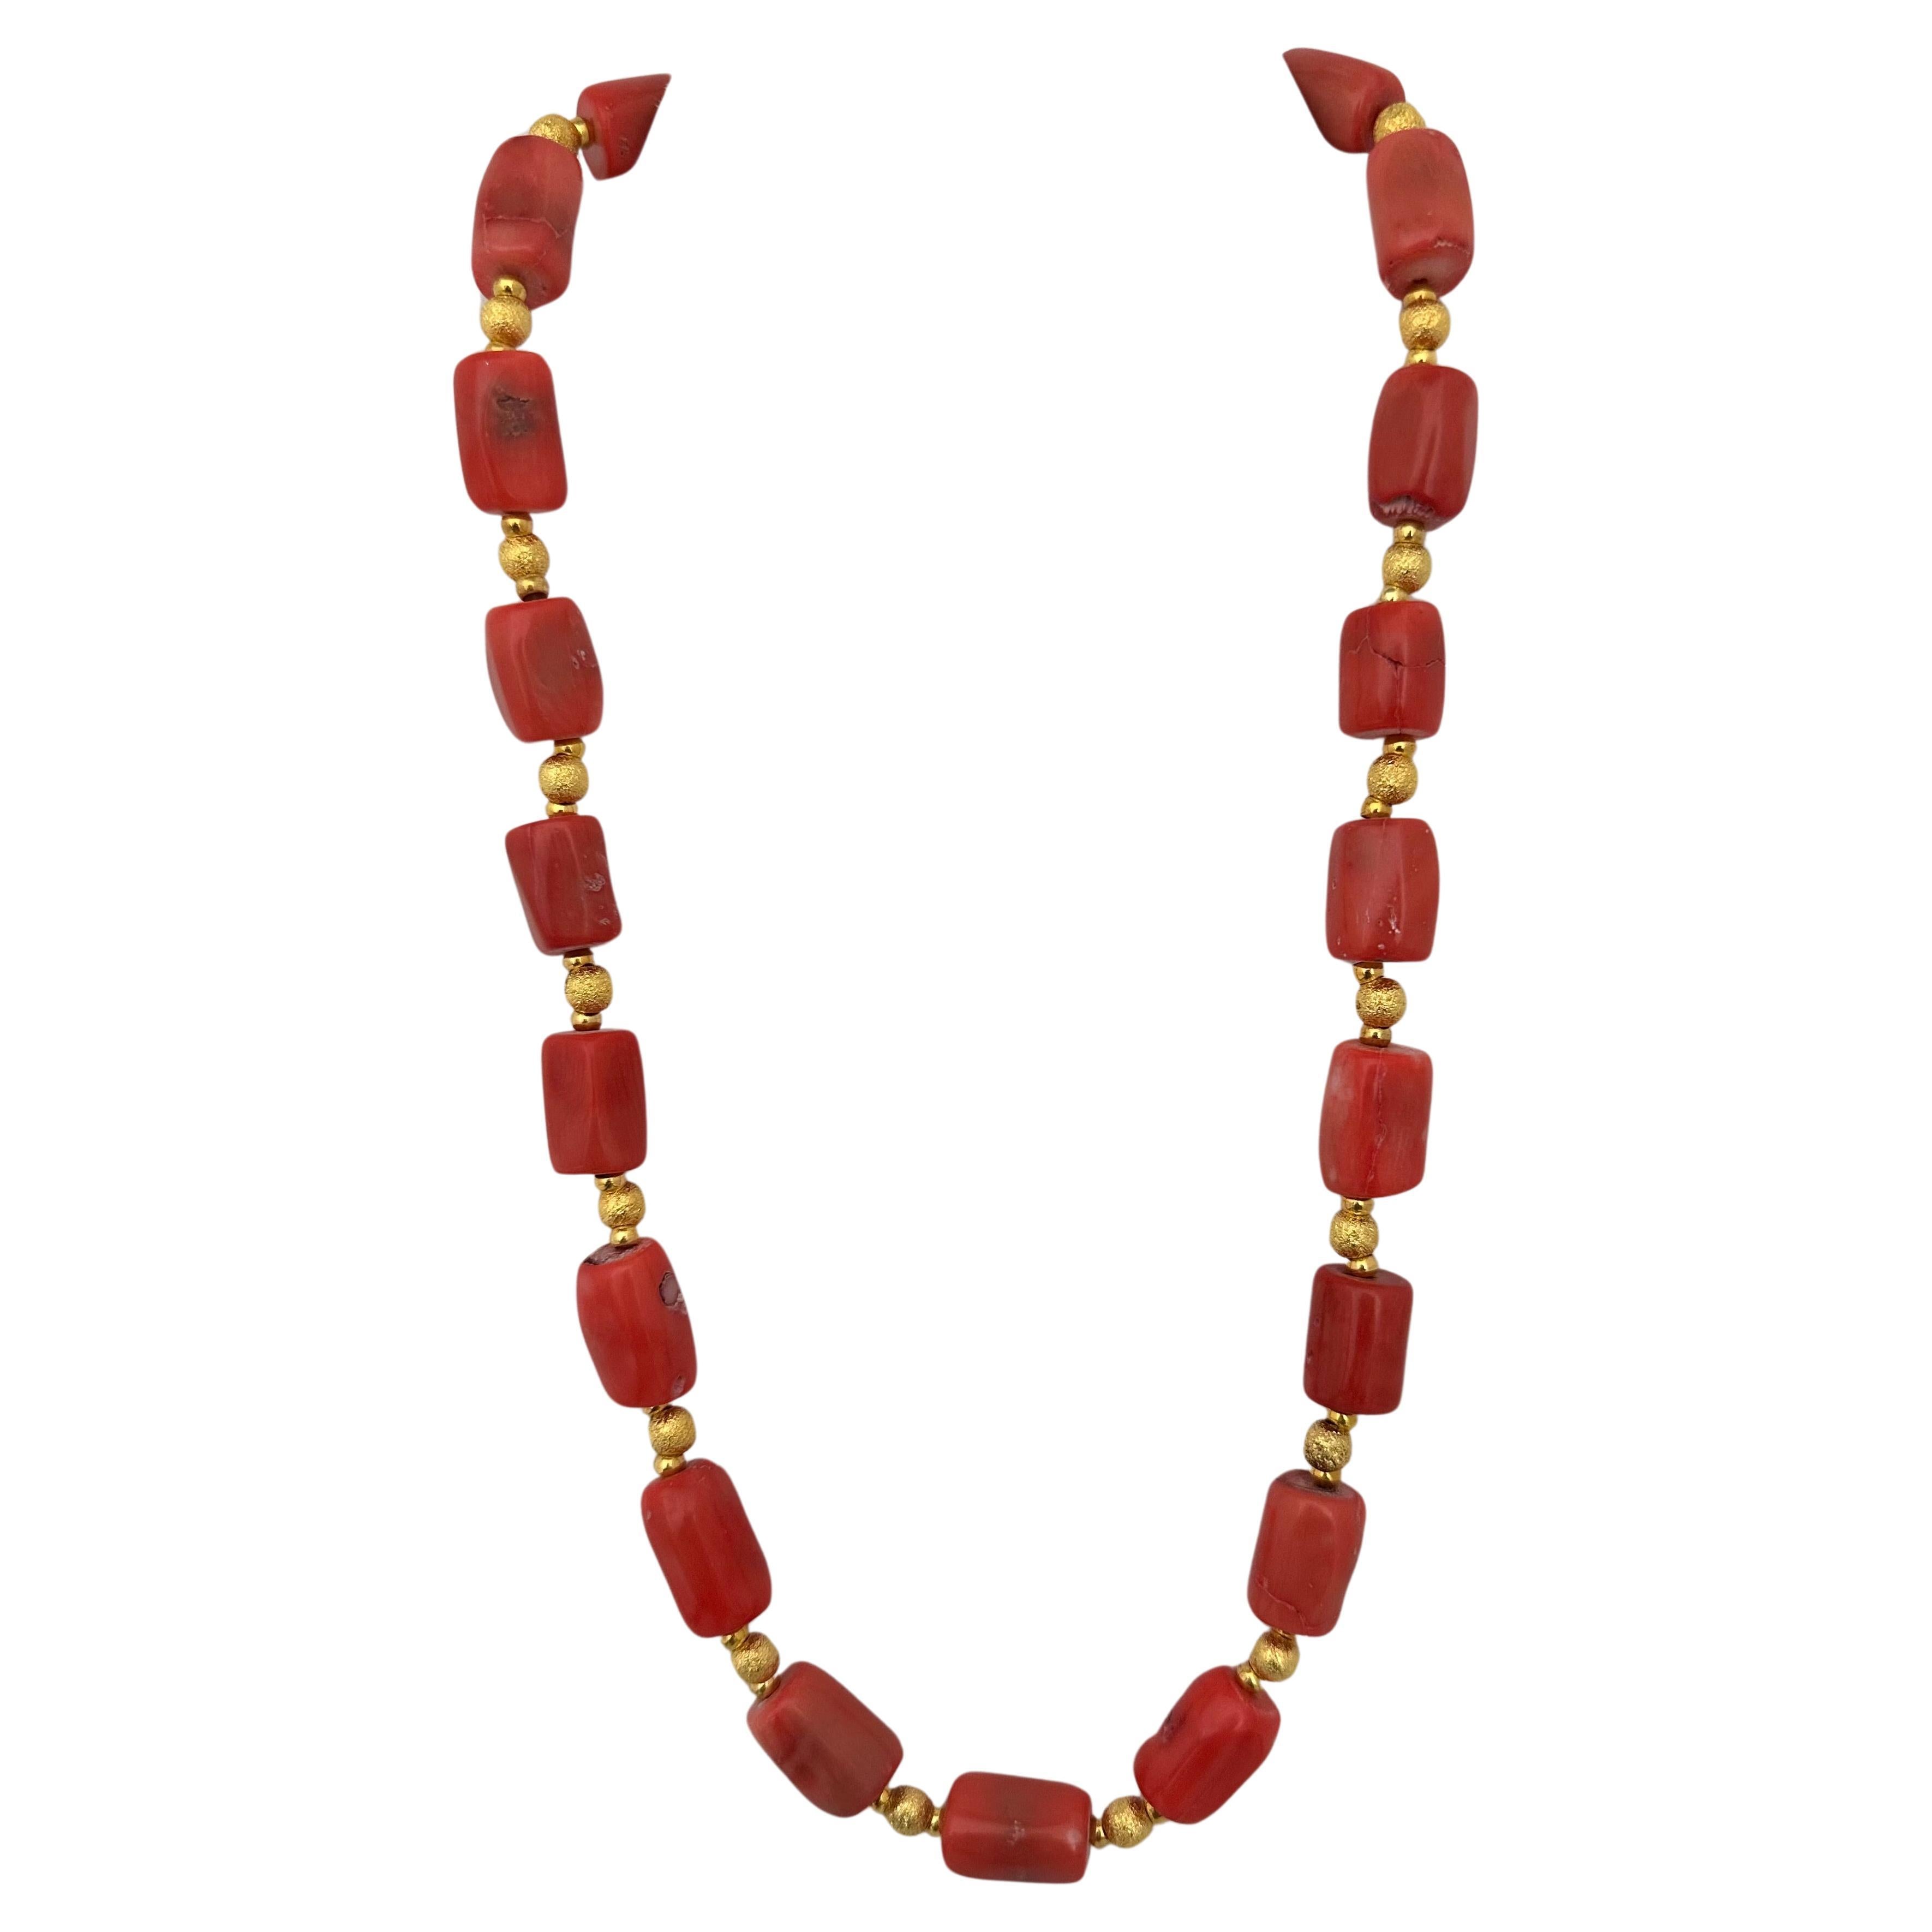 Handmade ~ Gold Beads & Salmon Barrel Shape Coral Beaded 23" Toggle Necklace C49 For Sale